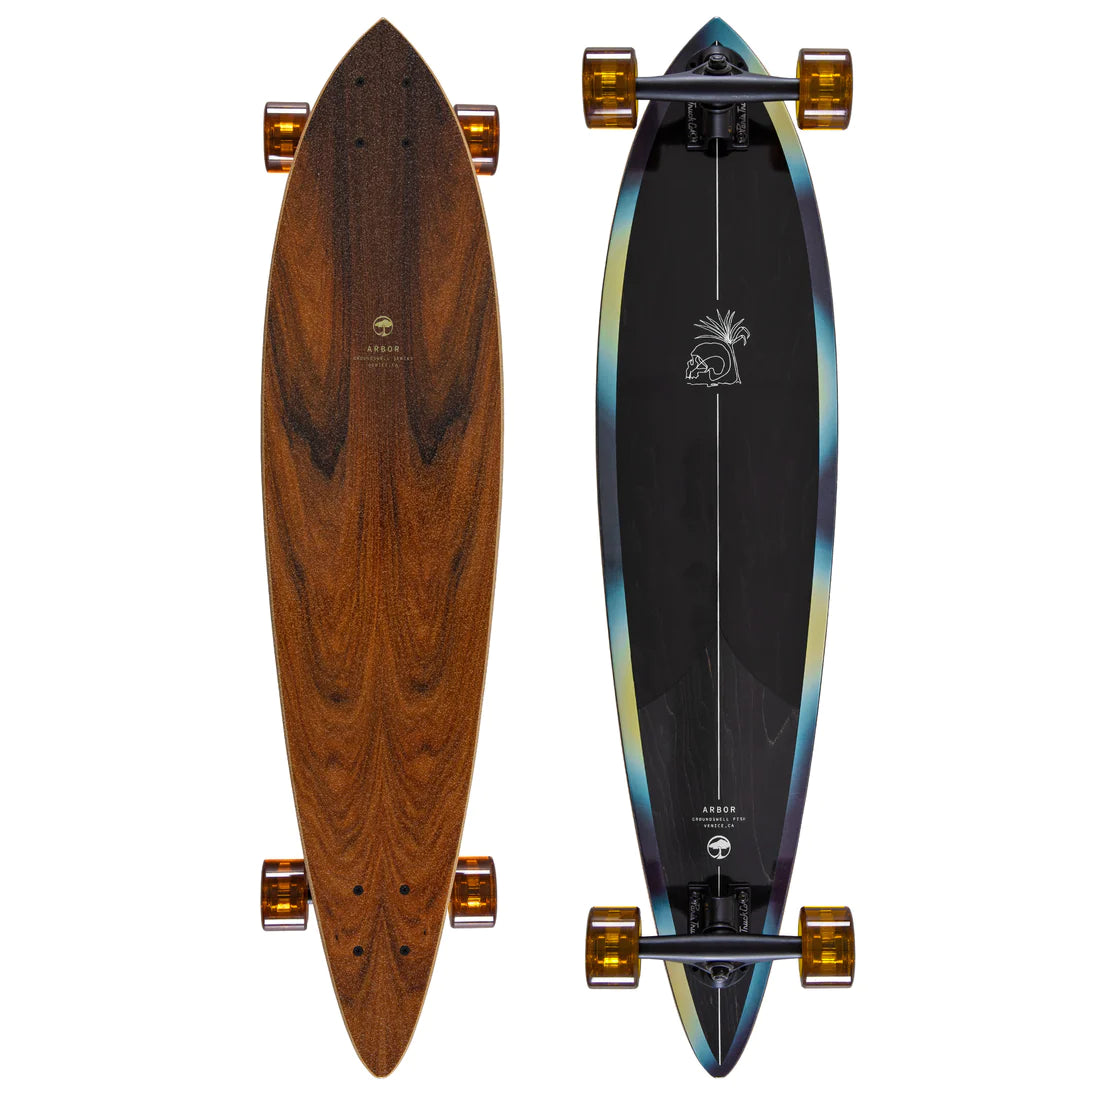 Arbor Groundswell Fish 8.5" x 37" Longboard Complete